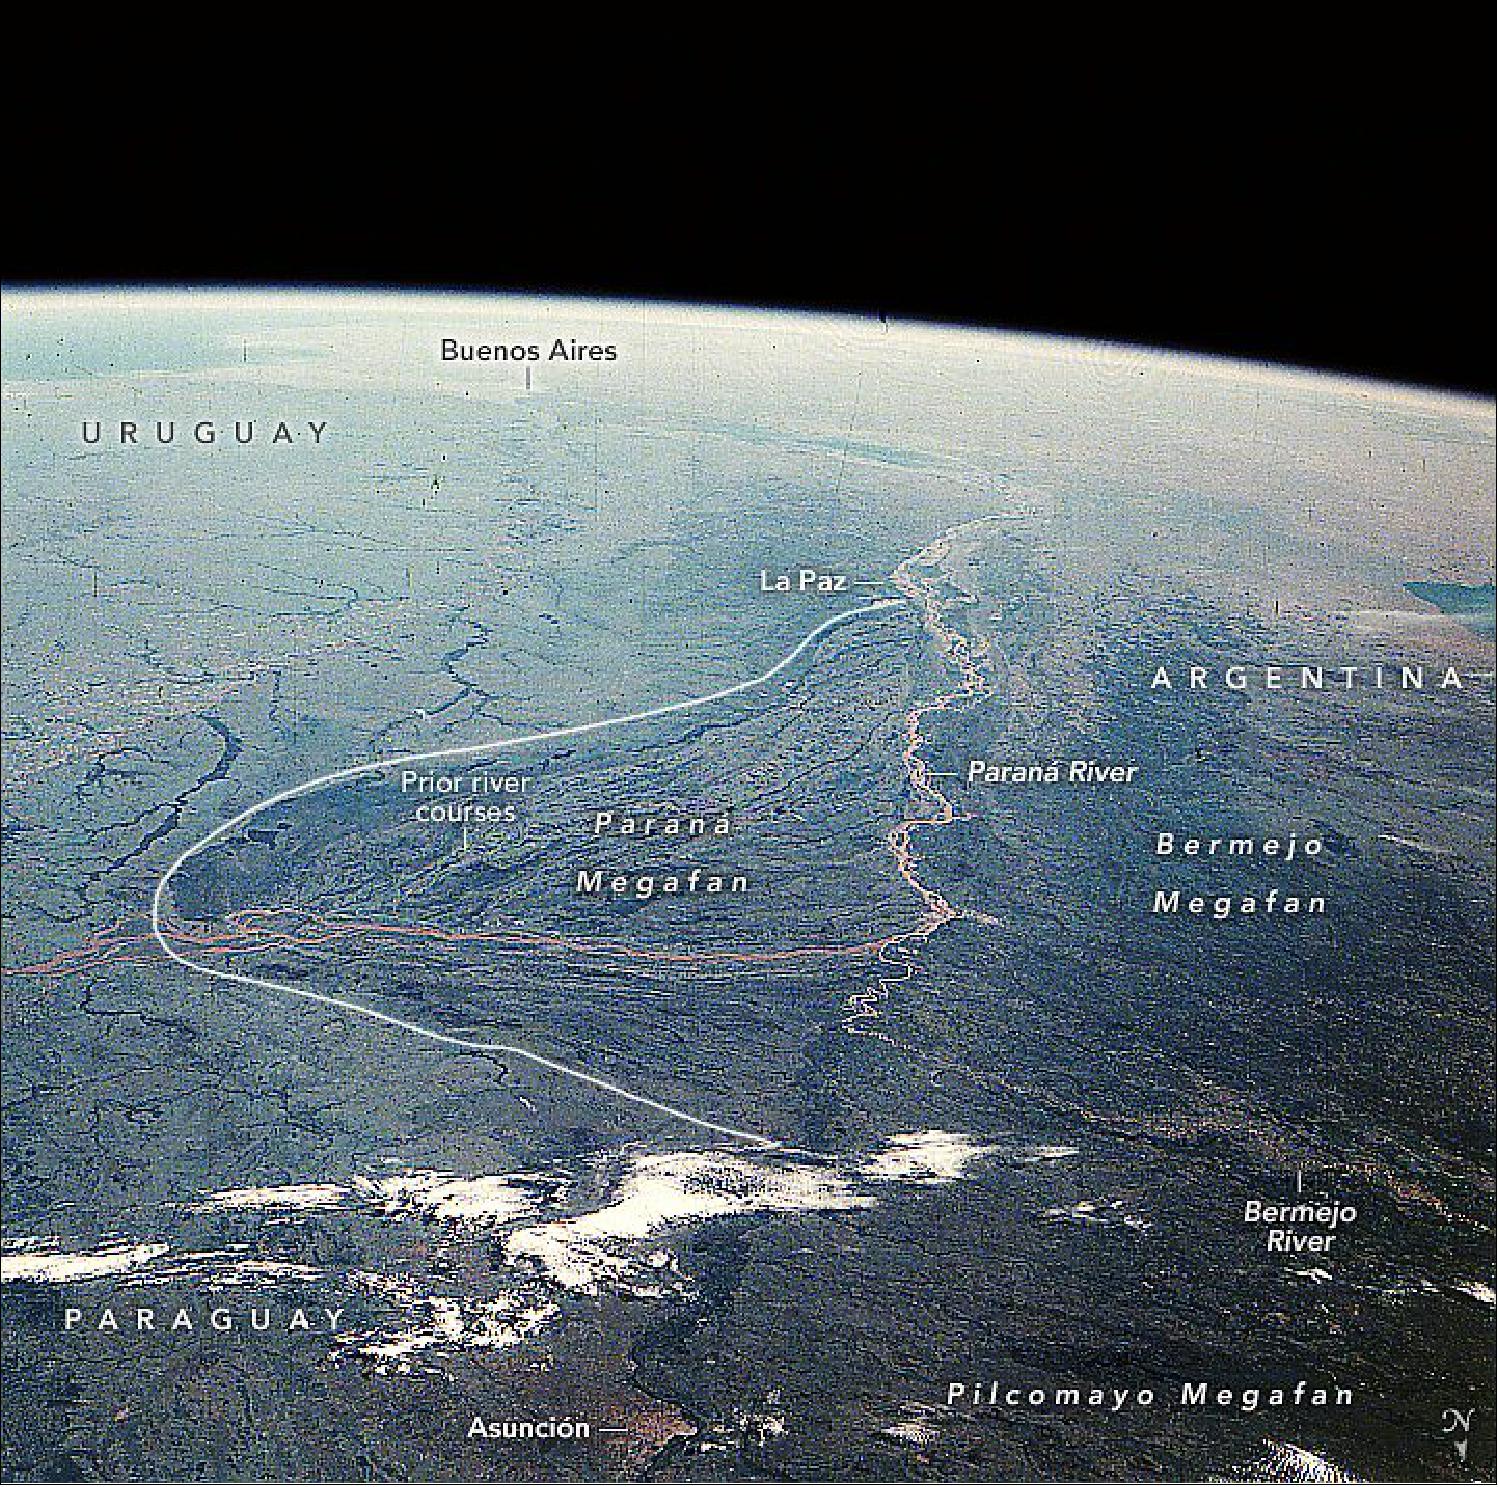 Figure 44: Though 36 years old, this photo remains one of the best for demonstrating vast inland delta landscapes. The photo was taken with a Hasselblad film camera—common in the days before astronauts switched to digital cameras—and before wide views were easily obtainable from the International Space Station. It remains one of the best images to demonstrate megafan landscapes. Two other megafans are partly visible: the lower 100 km (60 miles) of the Pilcomayo and Bermejo megafans. The Pilcomayo megafan is the largest on the planet at 705 km in length (image credit: The astronaut photograph STS51D-46-22 was acquired on April 18, 1985, with a Hasselblad film camera using a focal length of 100 mm. It is provided by the ISS Crew Earth Observations Facility and the Earth Science and Remote Sensing Unit, Johnson Space Center. The image was taken by a member of the STS-51D crew. The image has been cropped and enhanced to improve contrast, and lens artifacts have been removed (image credit: NASA Earth Observatory, caption by Justin Wilkinson)